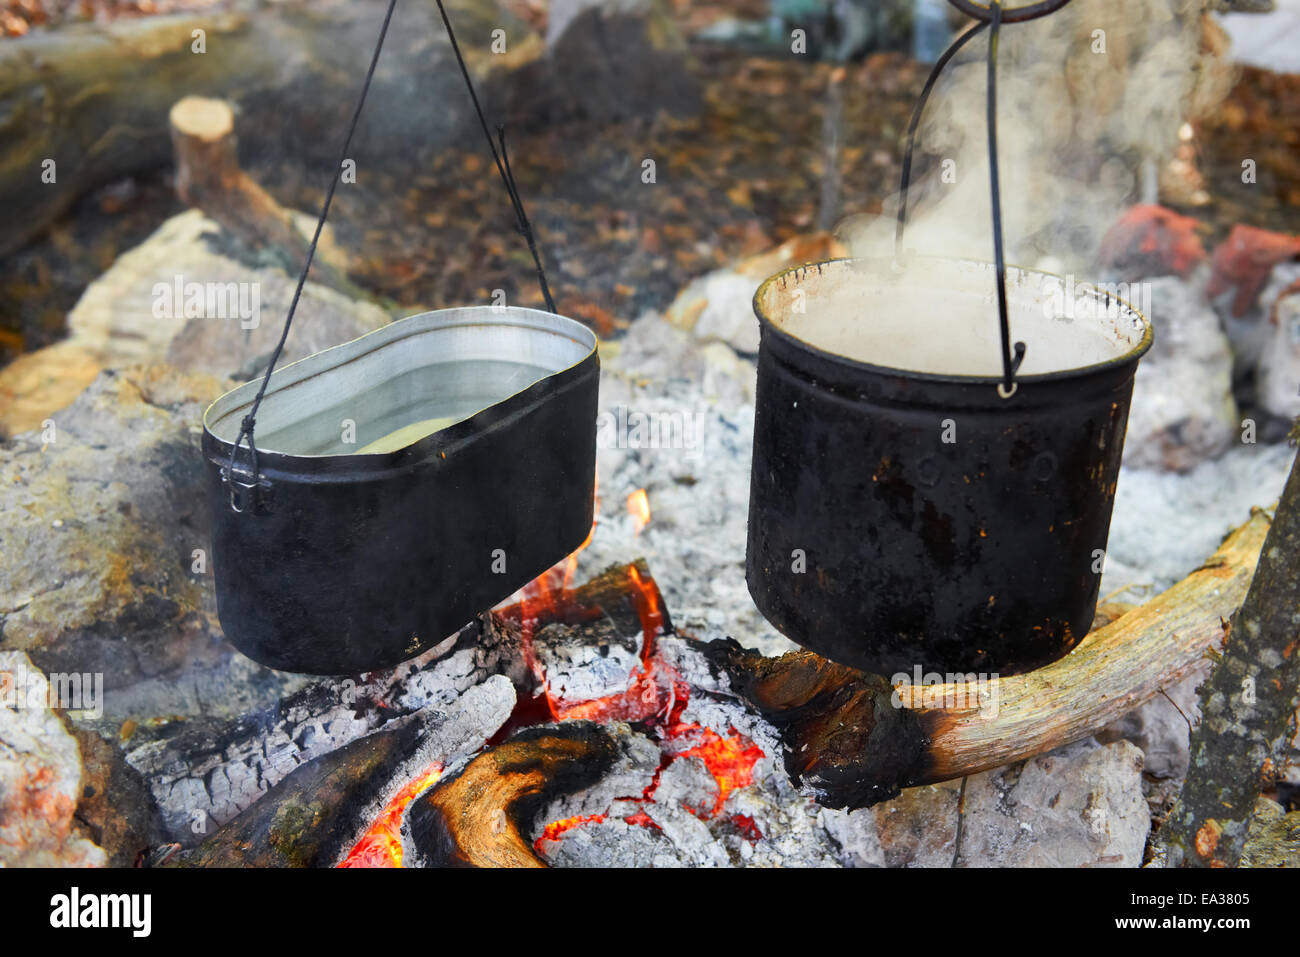 Premium Photo  Cooking camping pot with corncobs in a boiling water over  campfire.